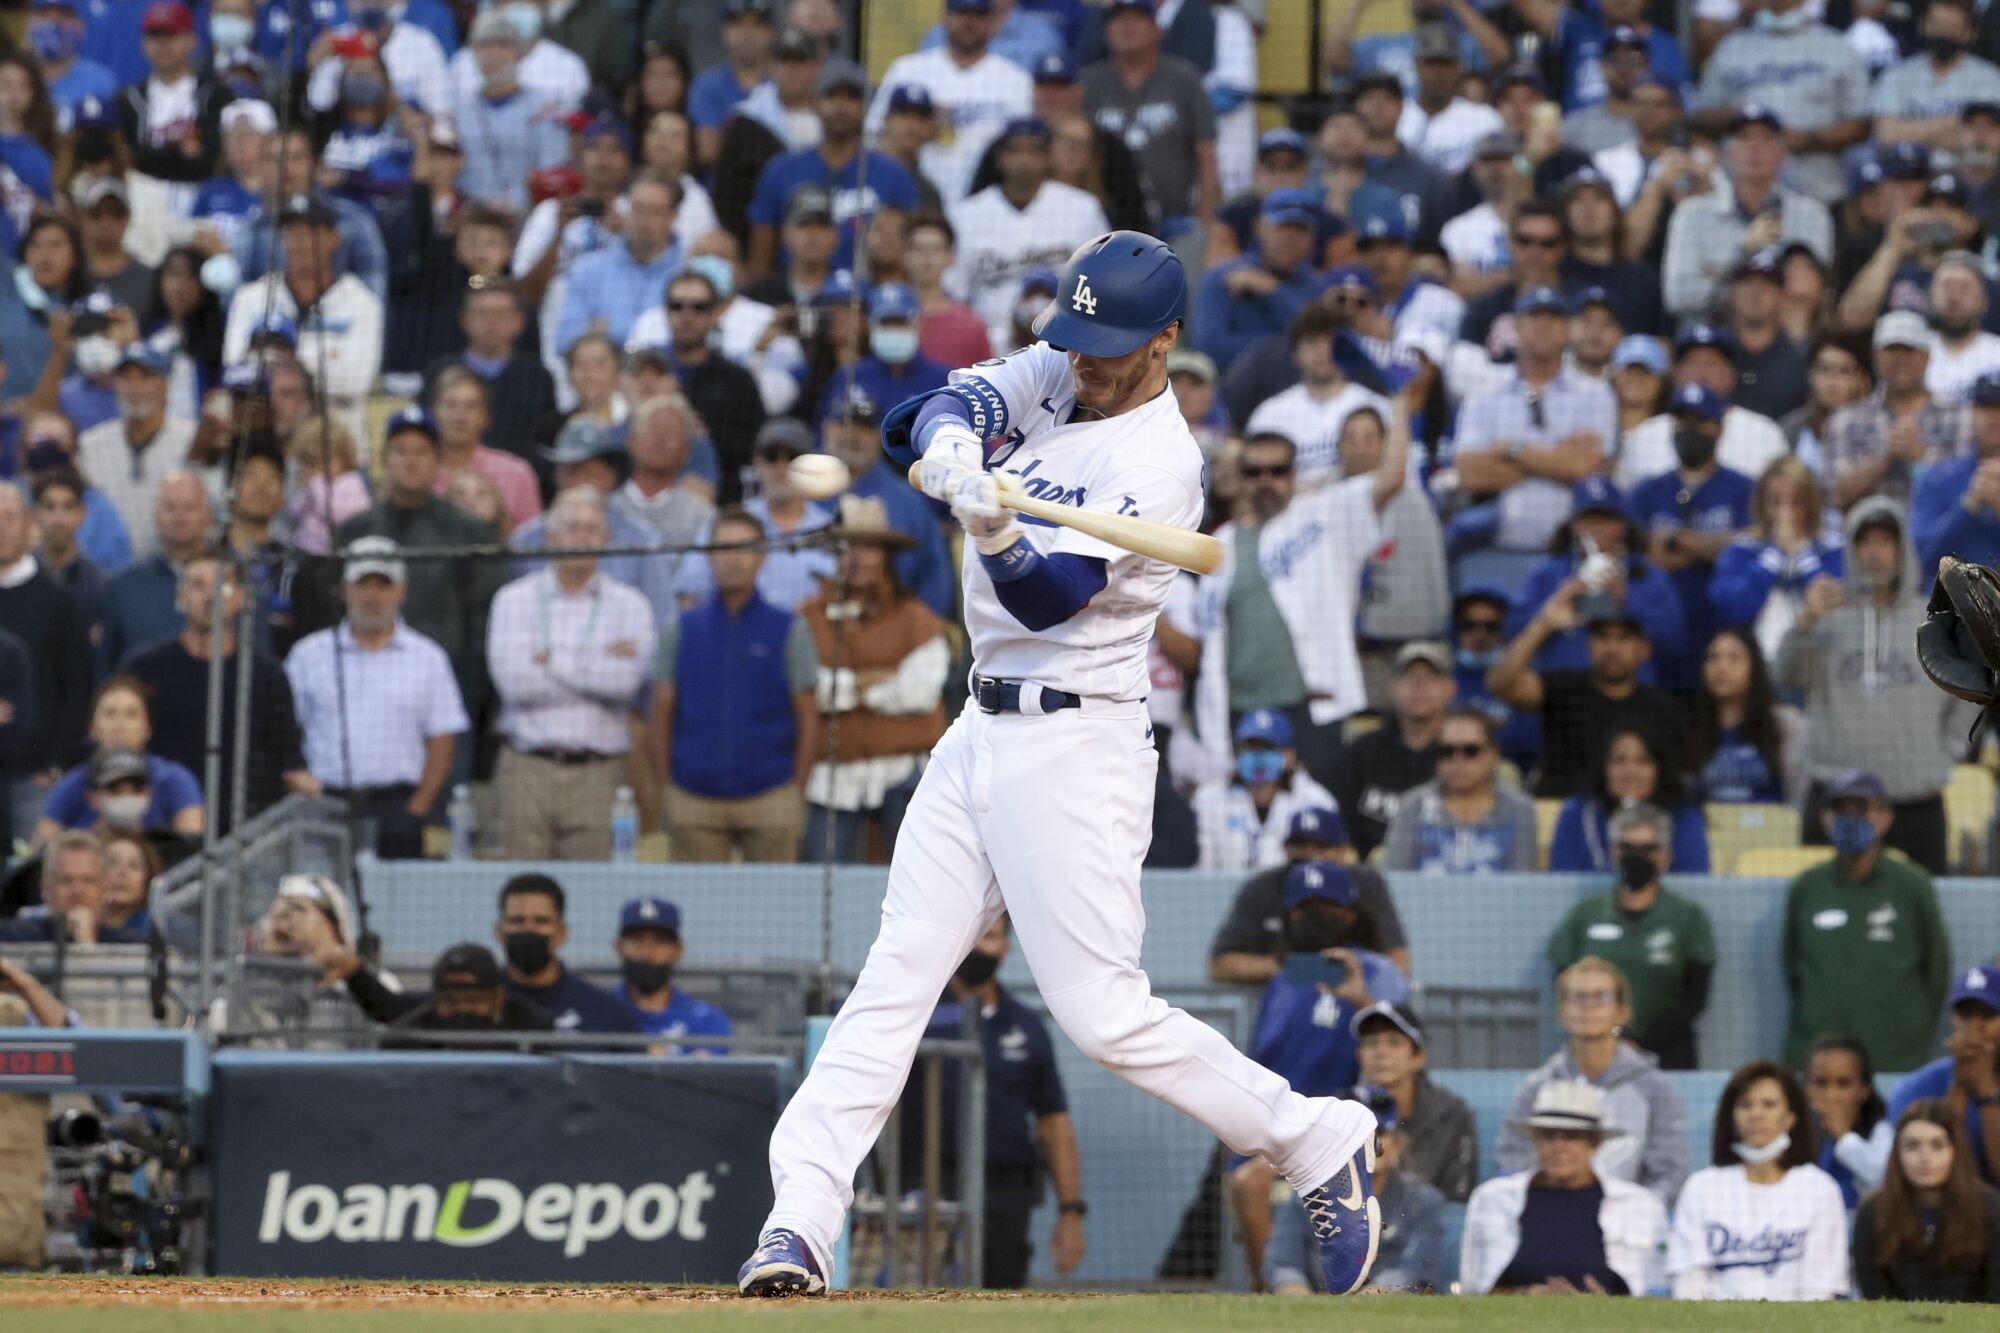 Los Angeles Dodgers' Cody Bellinger hits a three-run home run to tie the score during the eighth inning.